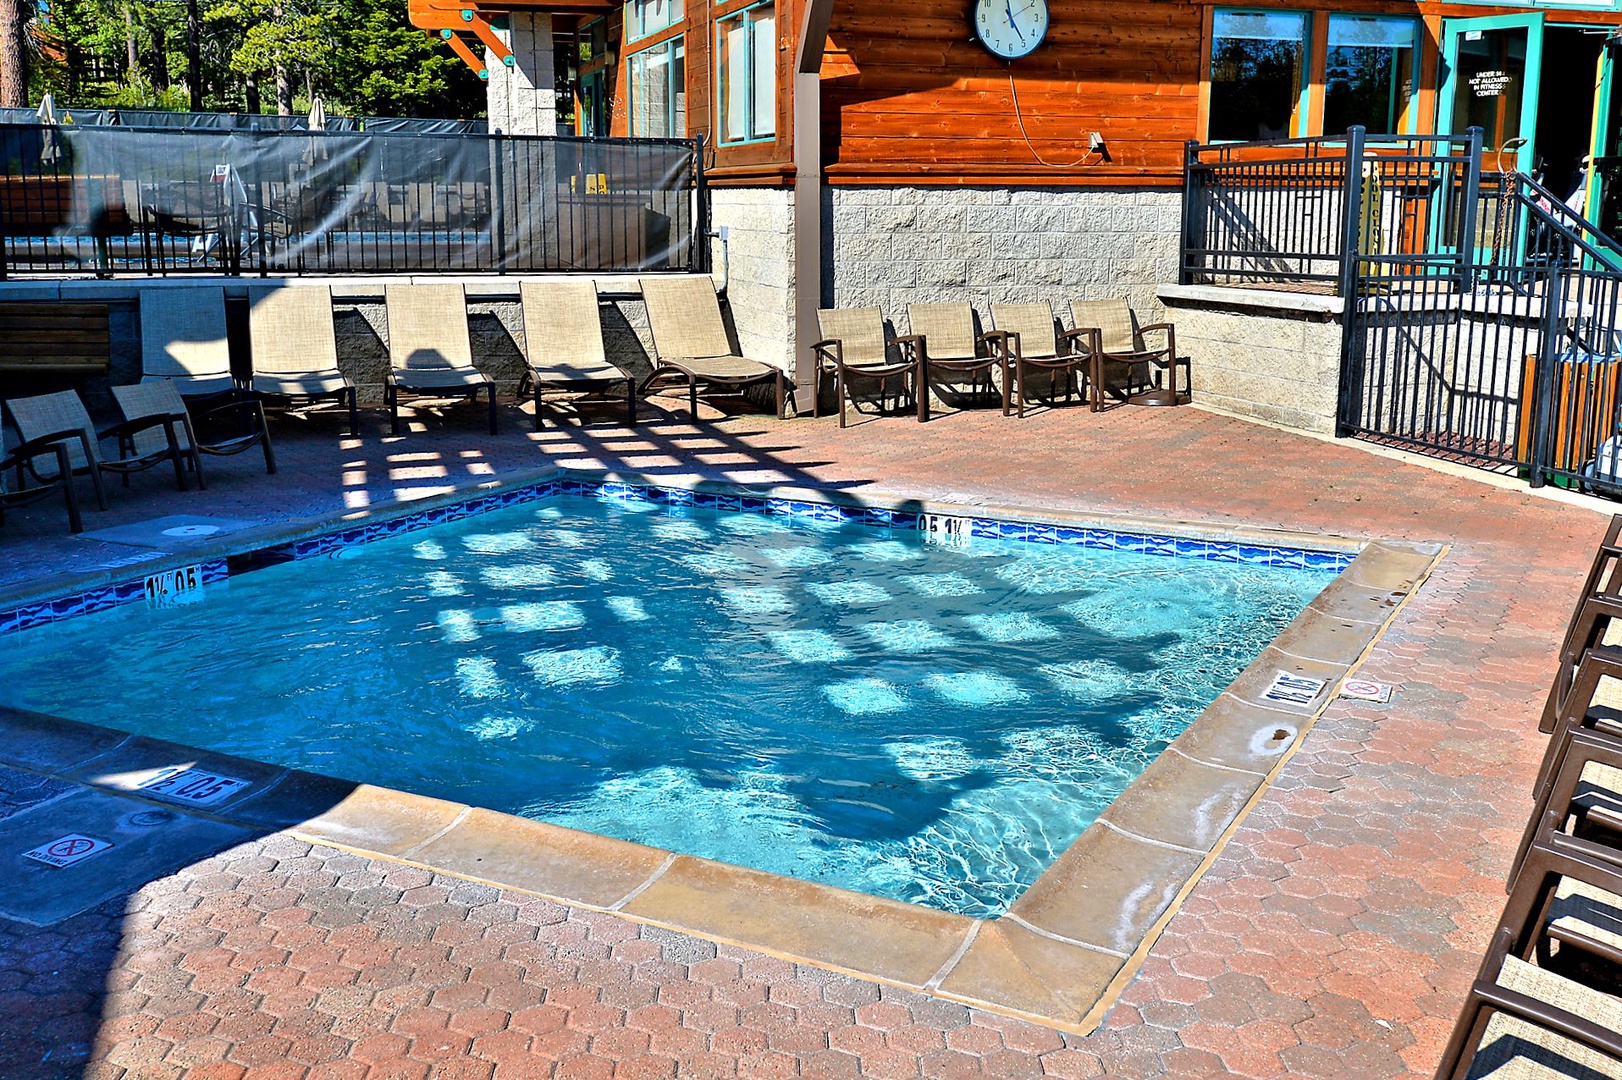 Hot Tub at the Rec Center: Tahoe Donner Creel Side Retreat with Hot Tub